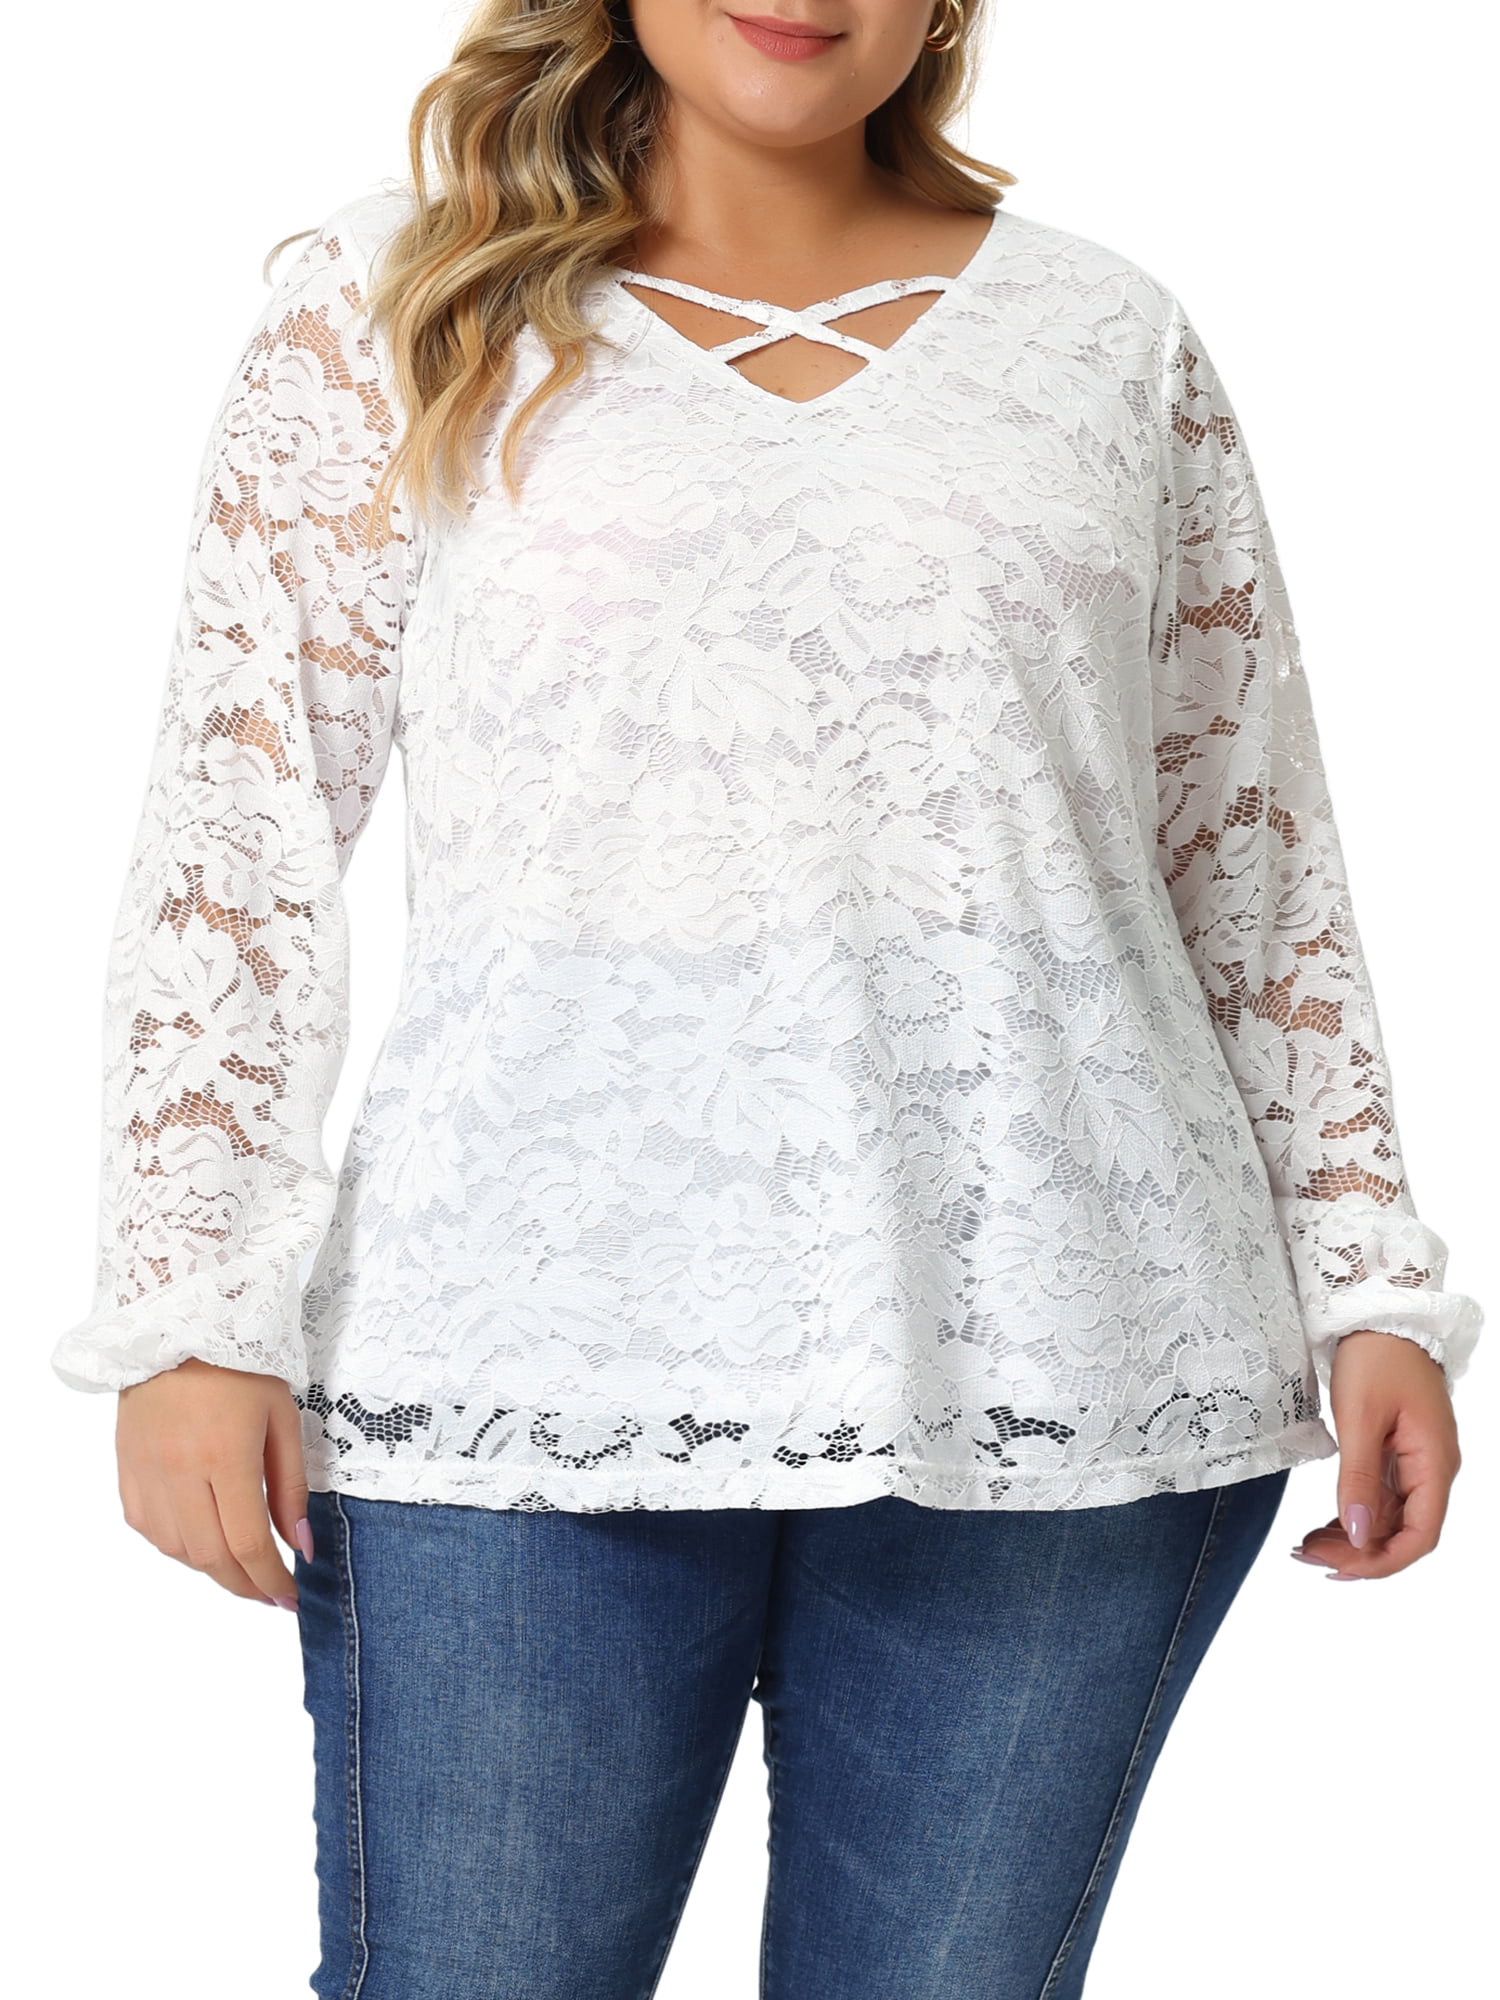 nightmare All kinds of anchor plus size long sleeve lace shirt